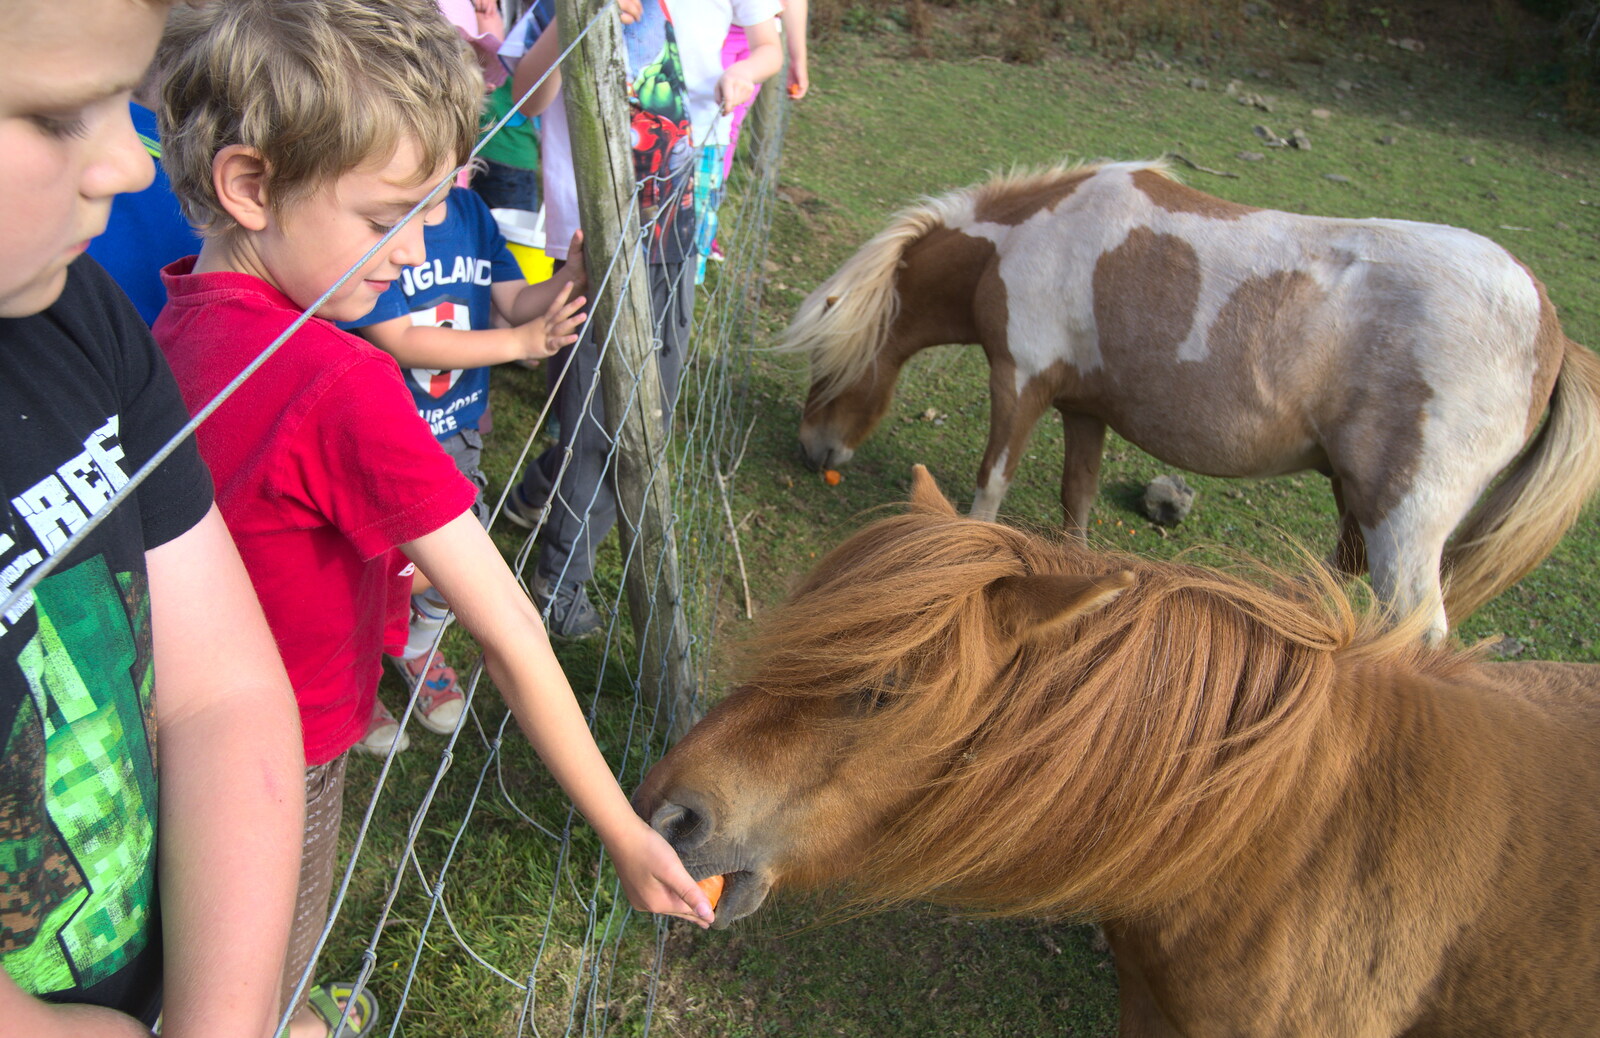 Feeding carrots to ponies from Camping With Sean, Ashburton, Devon - 8th August 2016